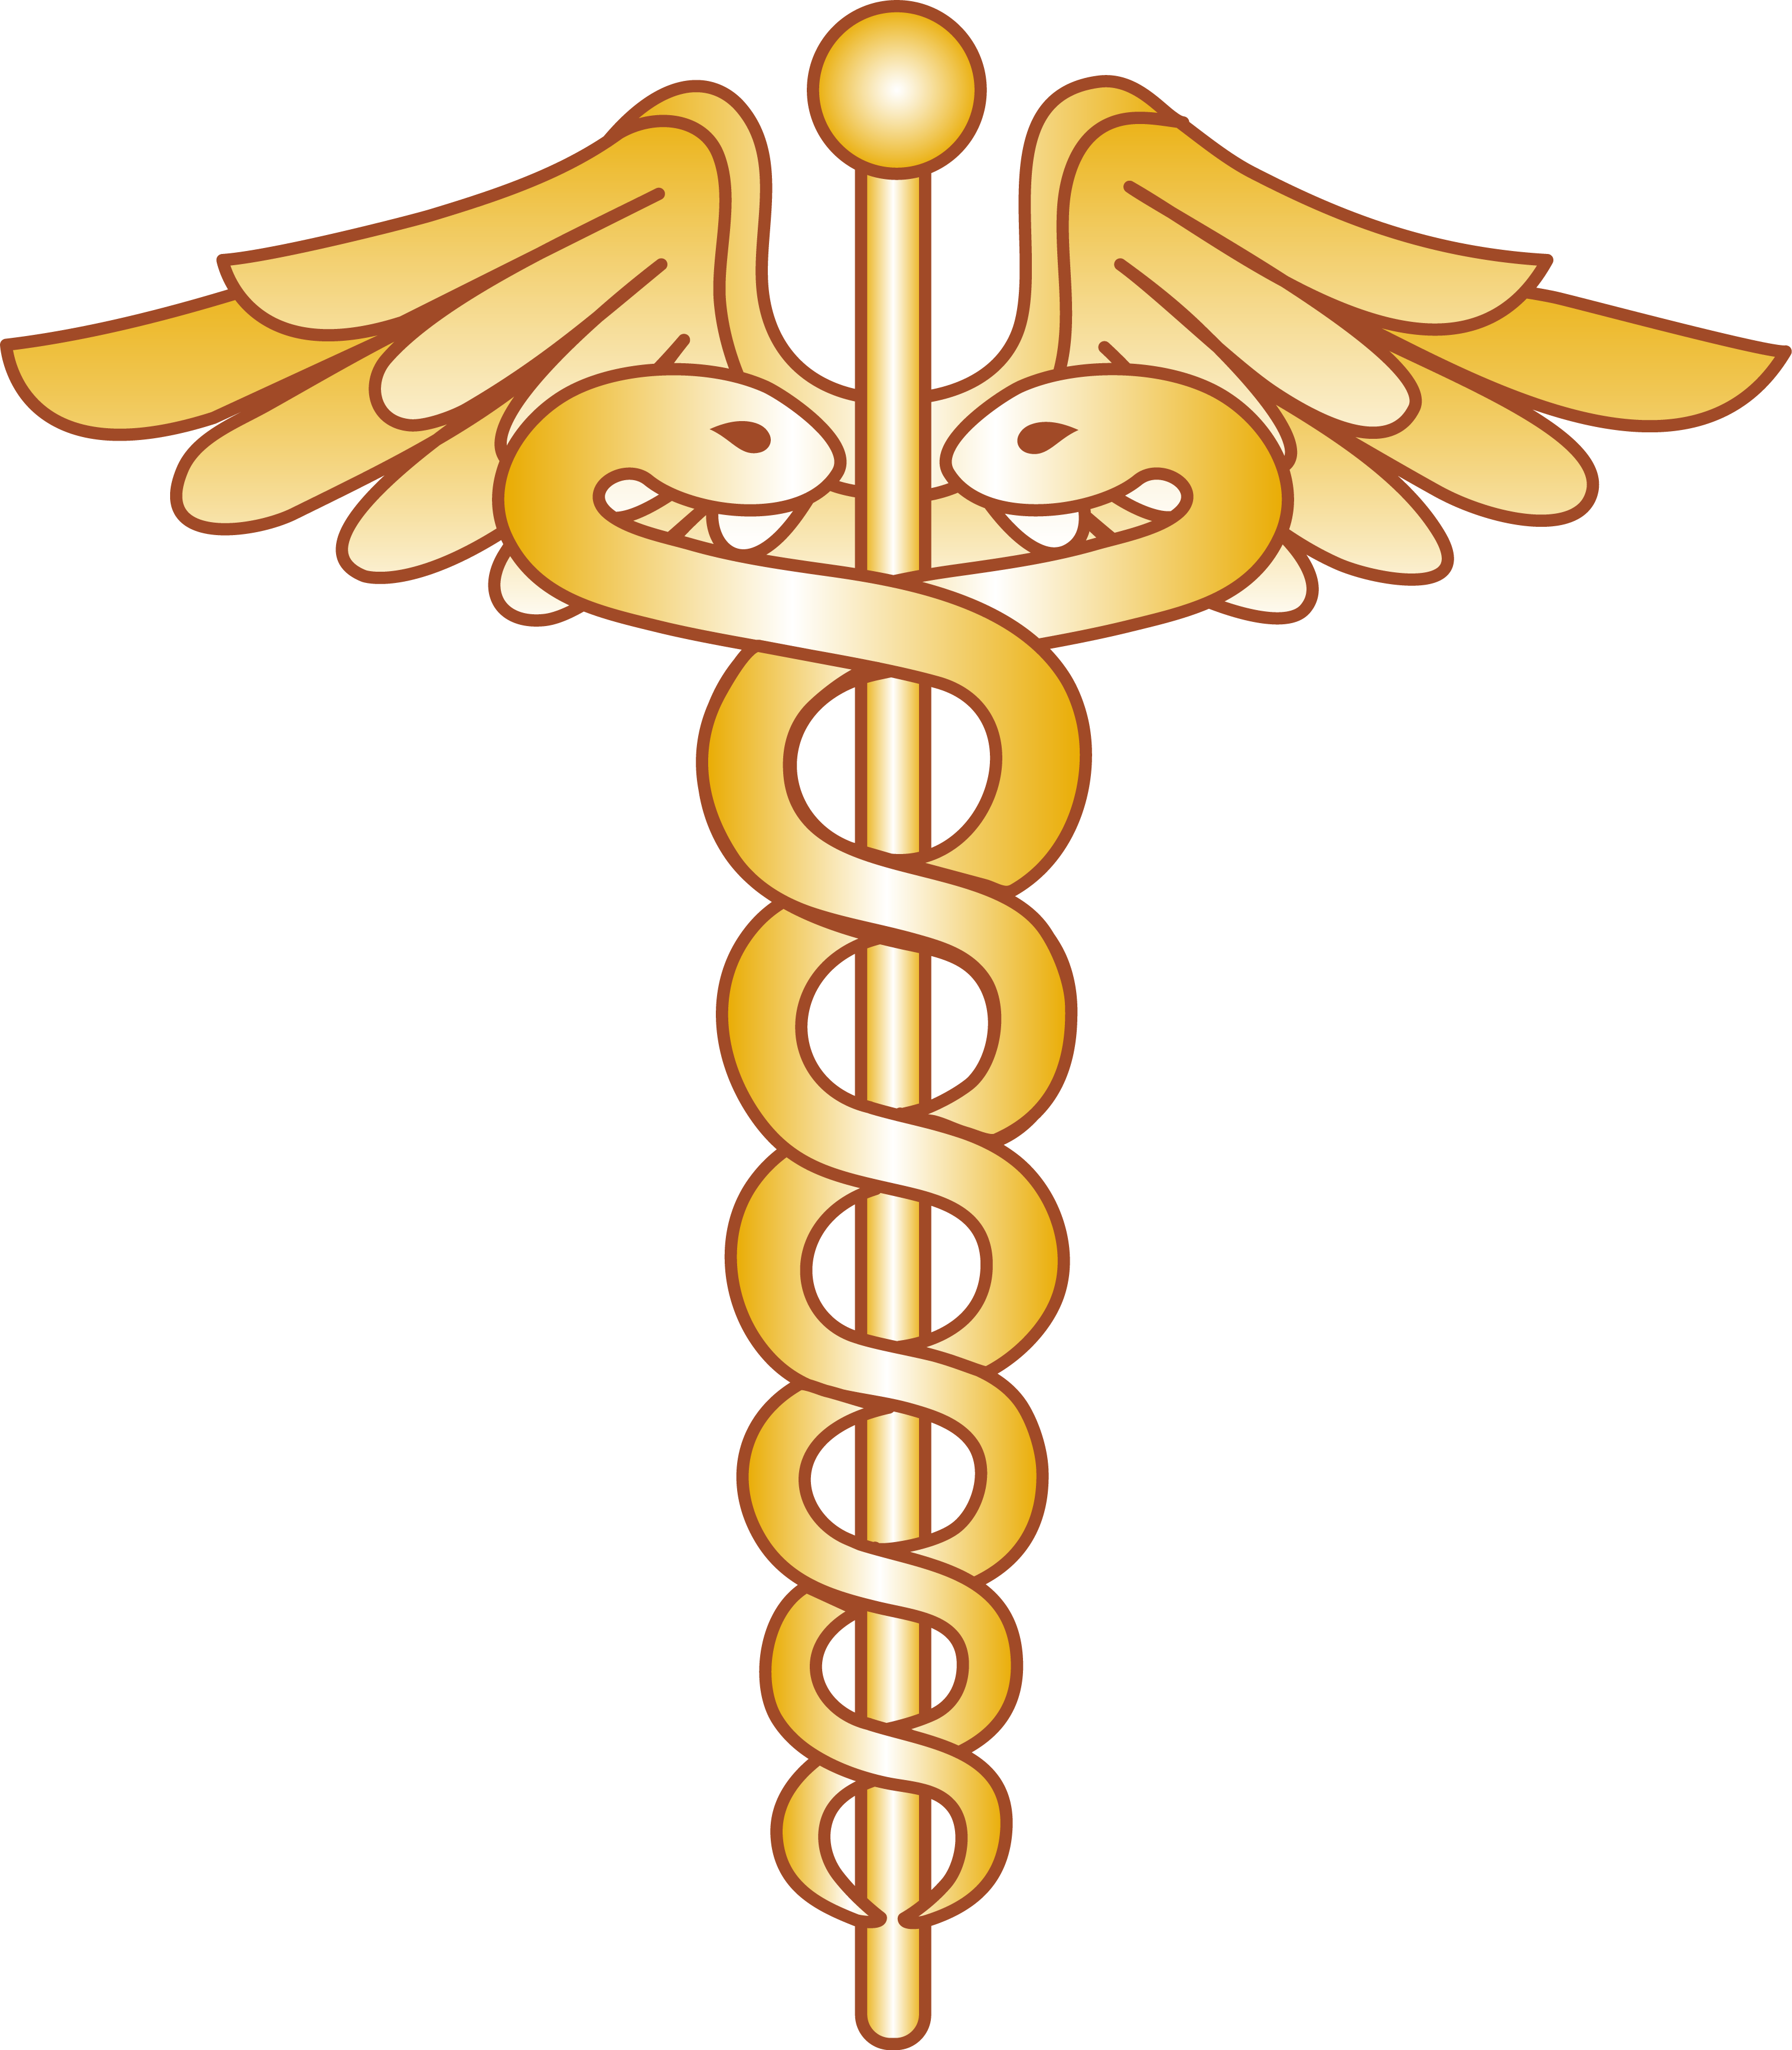 Health snake symbol the. Germs clipart medicine